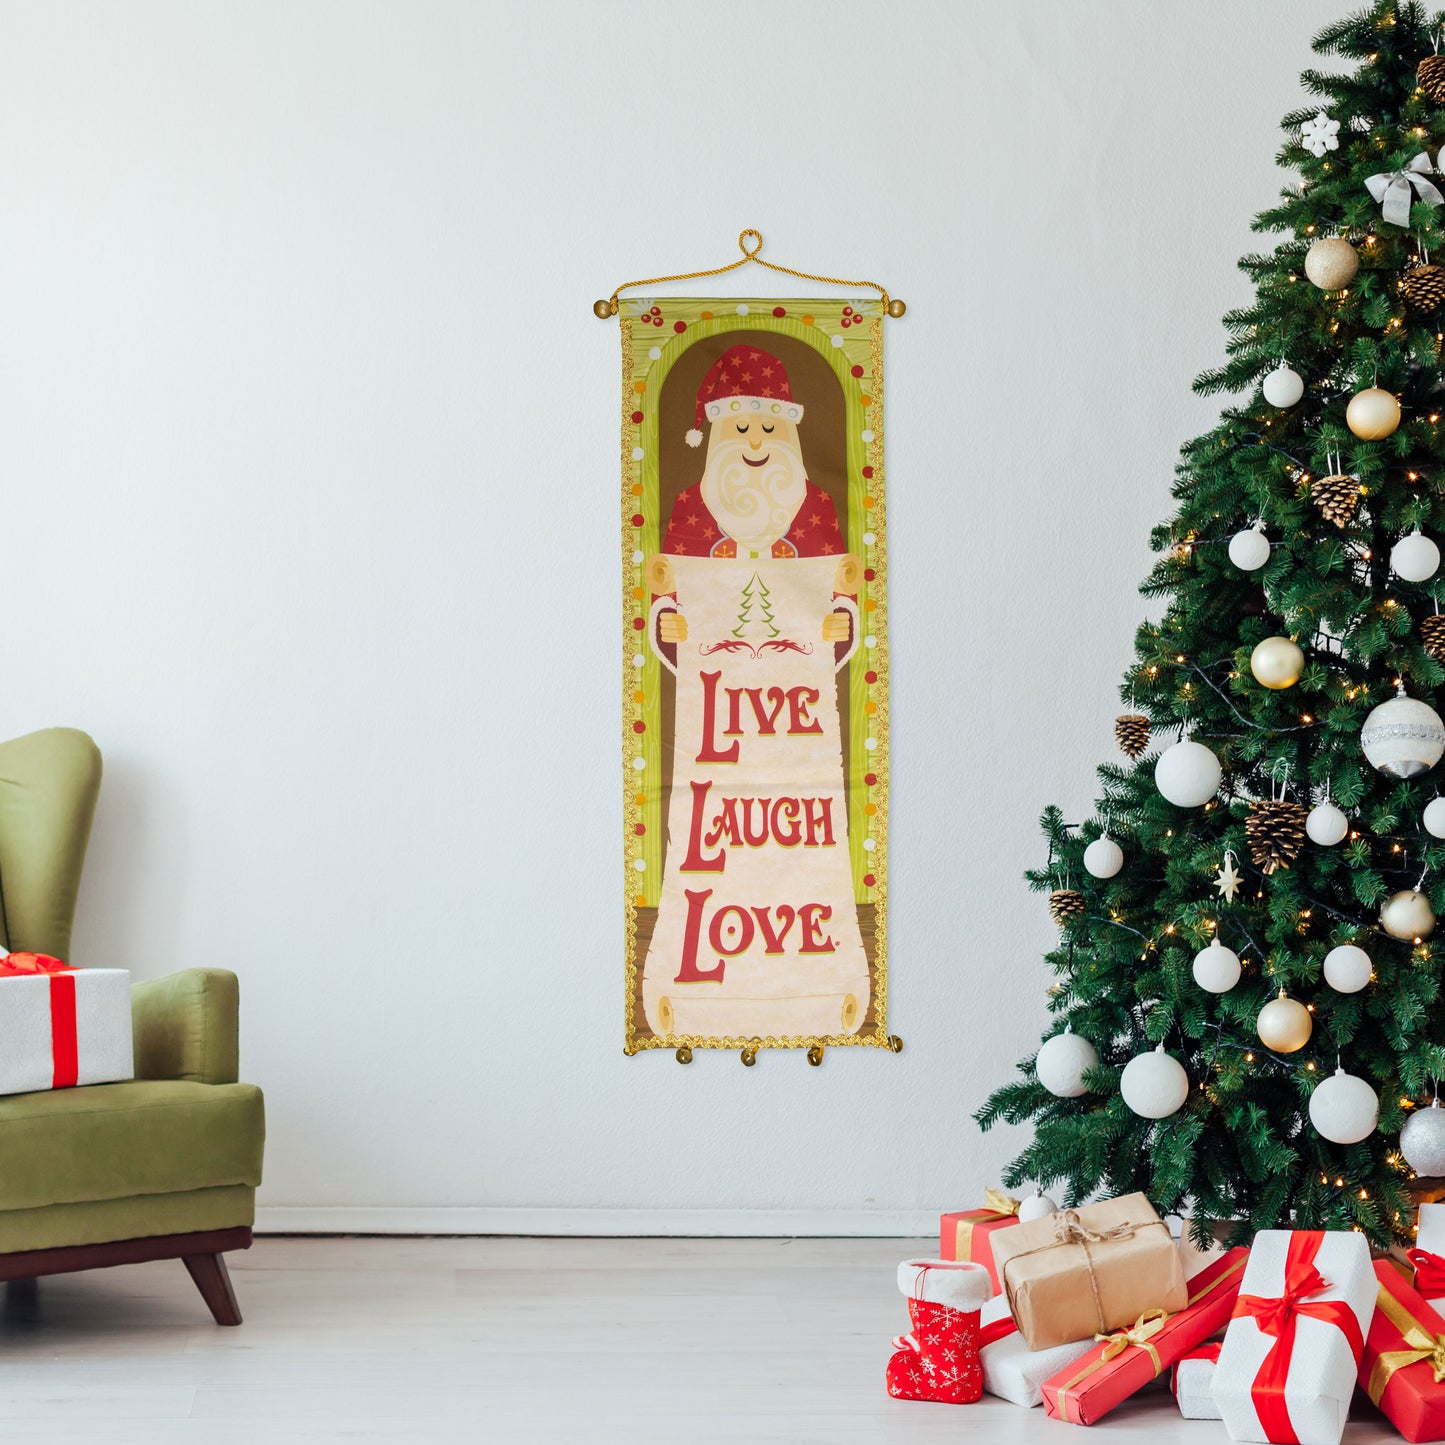 Live Laugh Love Santa’s Christmas Wish List for You Wall Door Tapestry